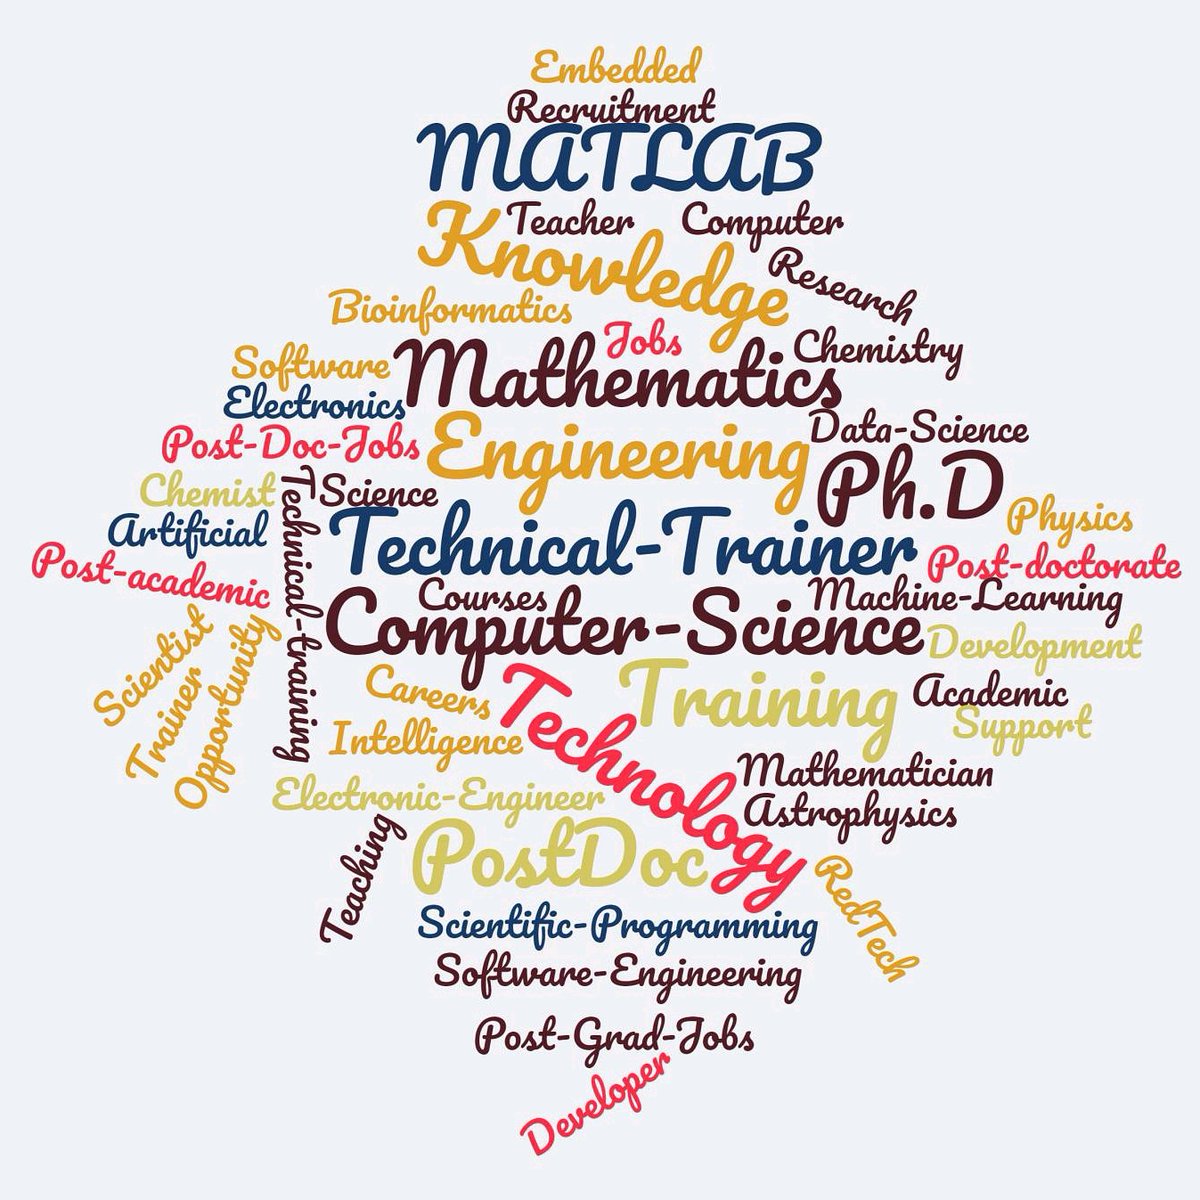 Do you know someone who loved the teaching aspects of their Ph.D.? If so we may have just the opportunity! Apply here: redtech-recruit.com/job/training-e… #postdoc #phdjobs #postdoccareers #techtrainer #techtraining #matlab #maths #compsci #Physics